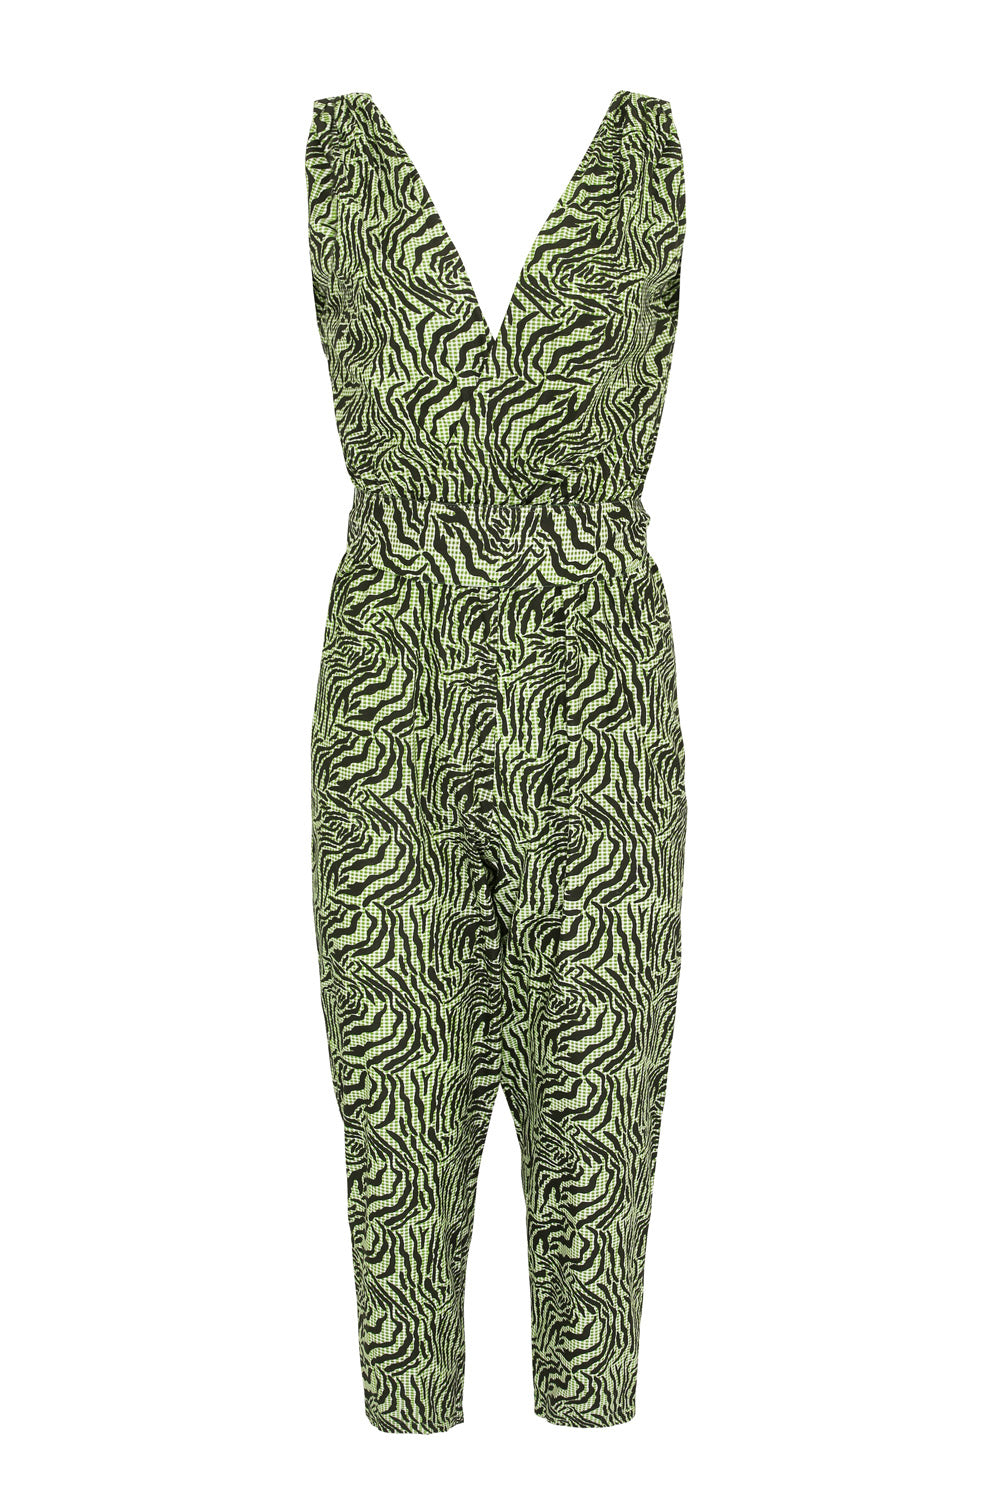 Just Like Heaven Green jumpsuit - Family Affairs